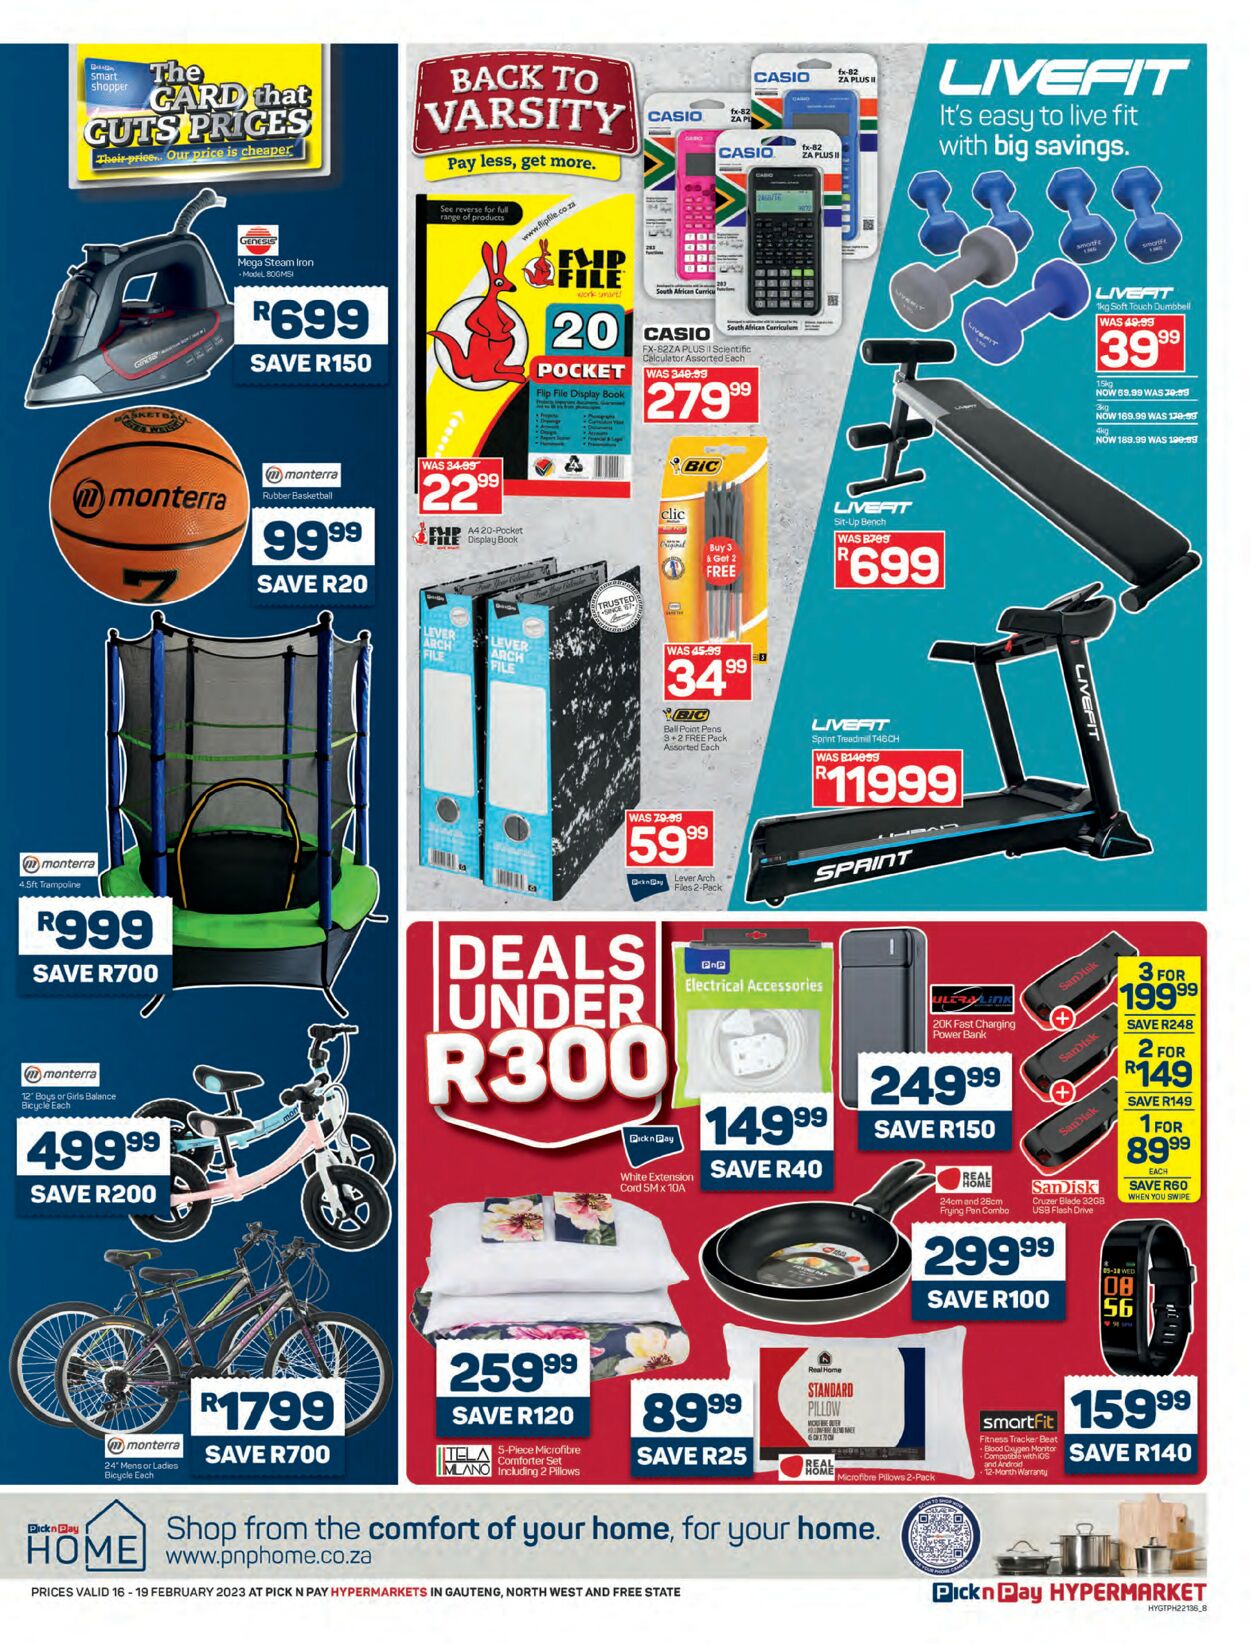 Pick n Pay Catalogue - 2023/02/16-2023/02/19 (Page 8)